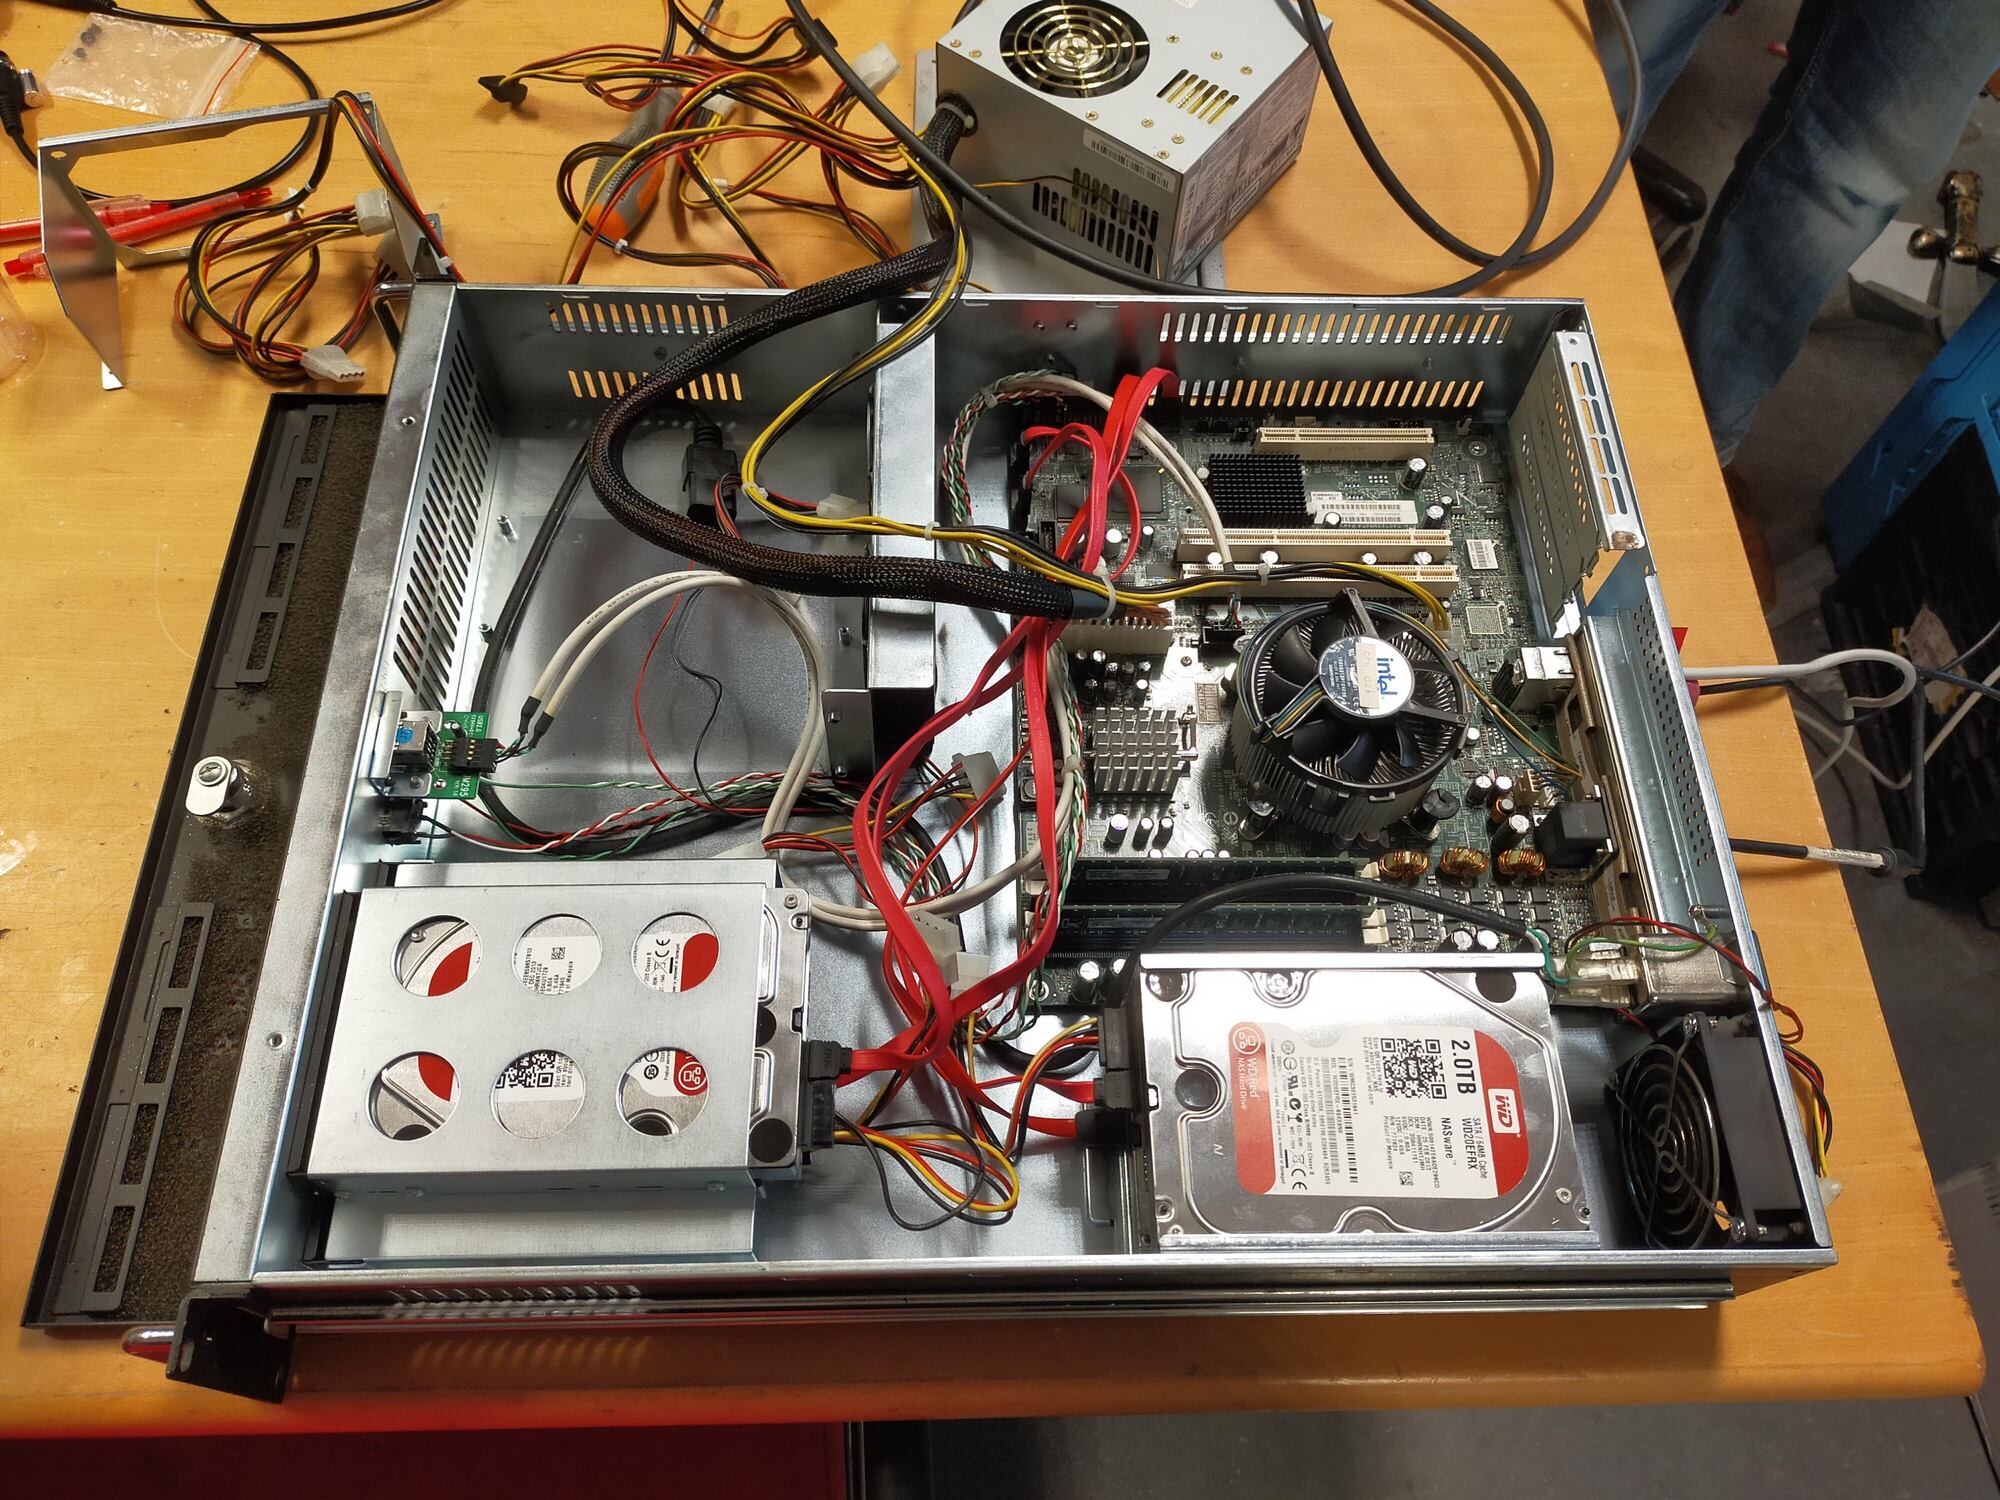 Benedictus during the maintenance in May, here still with its original power supply and motherboard.